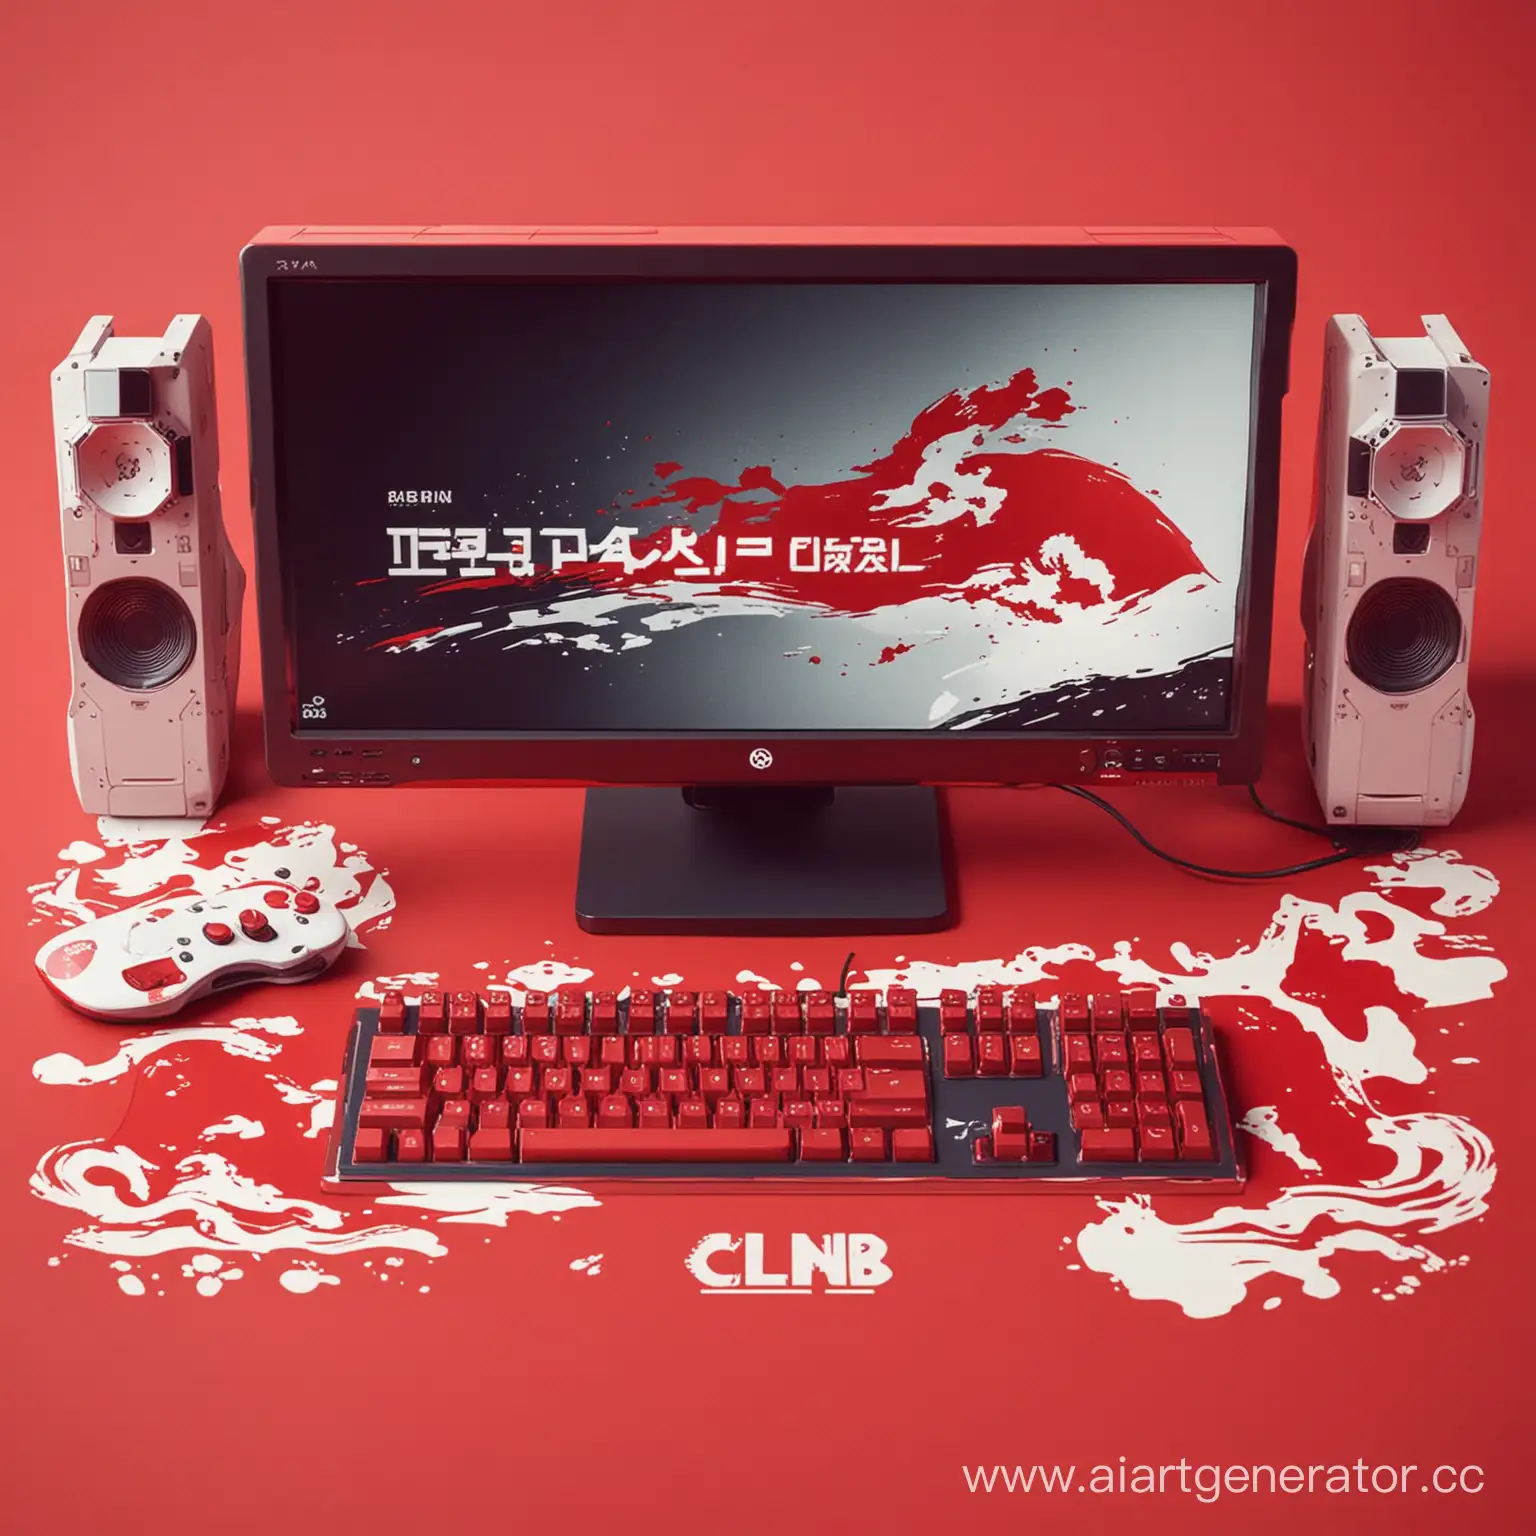 Japanese-Style-Computer-Gaming-Club-in-Red-and-White